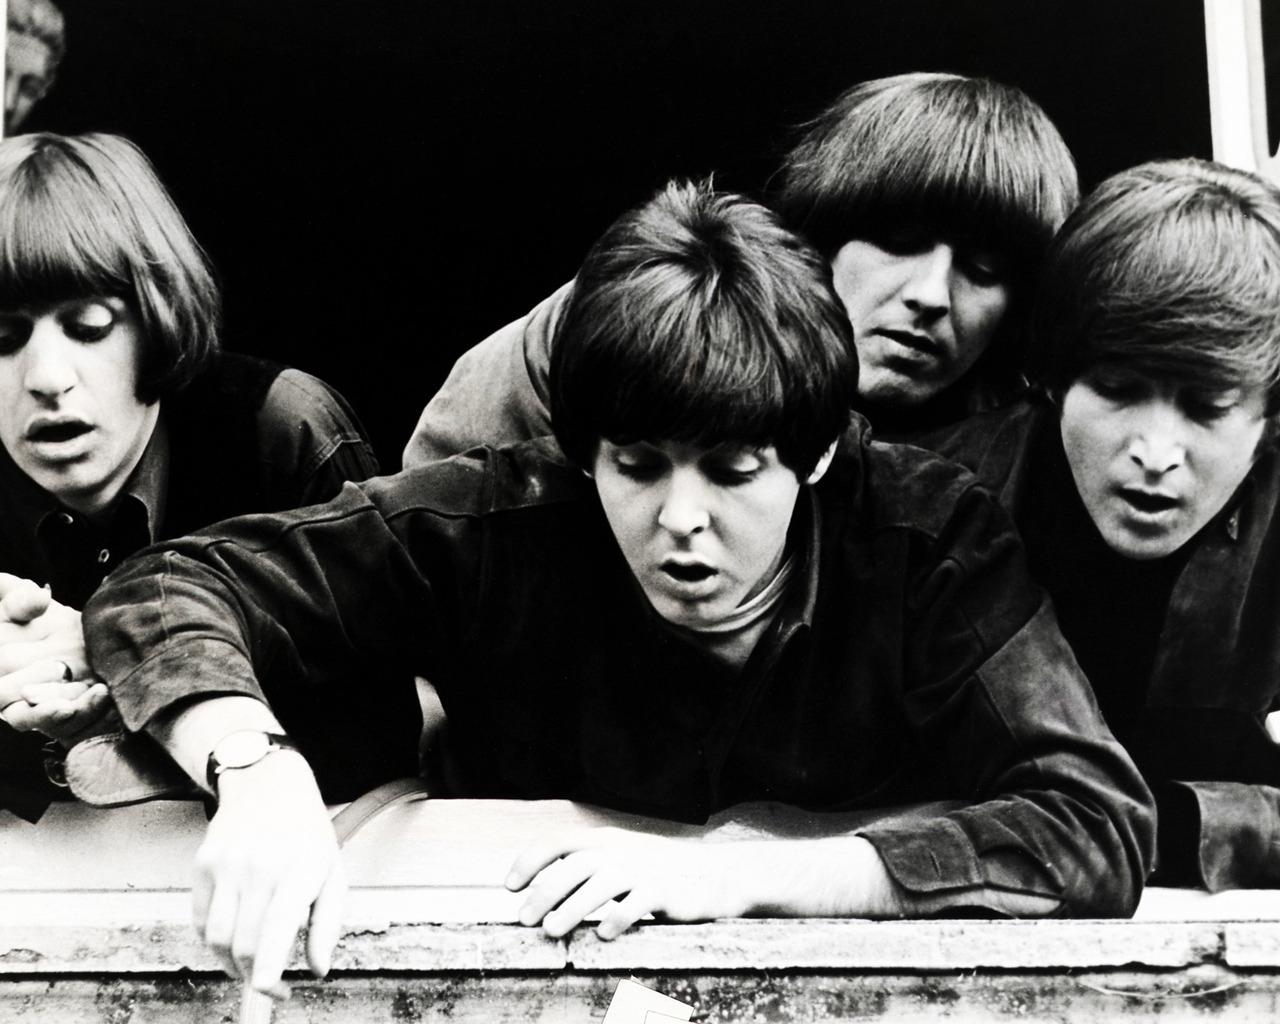 Beatles in The Youth for 1280 x 1024 resolution